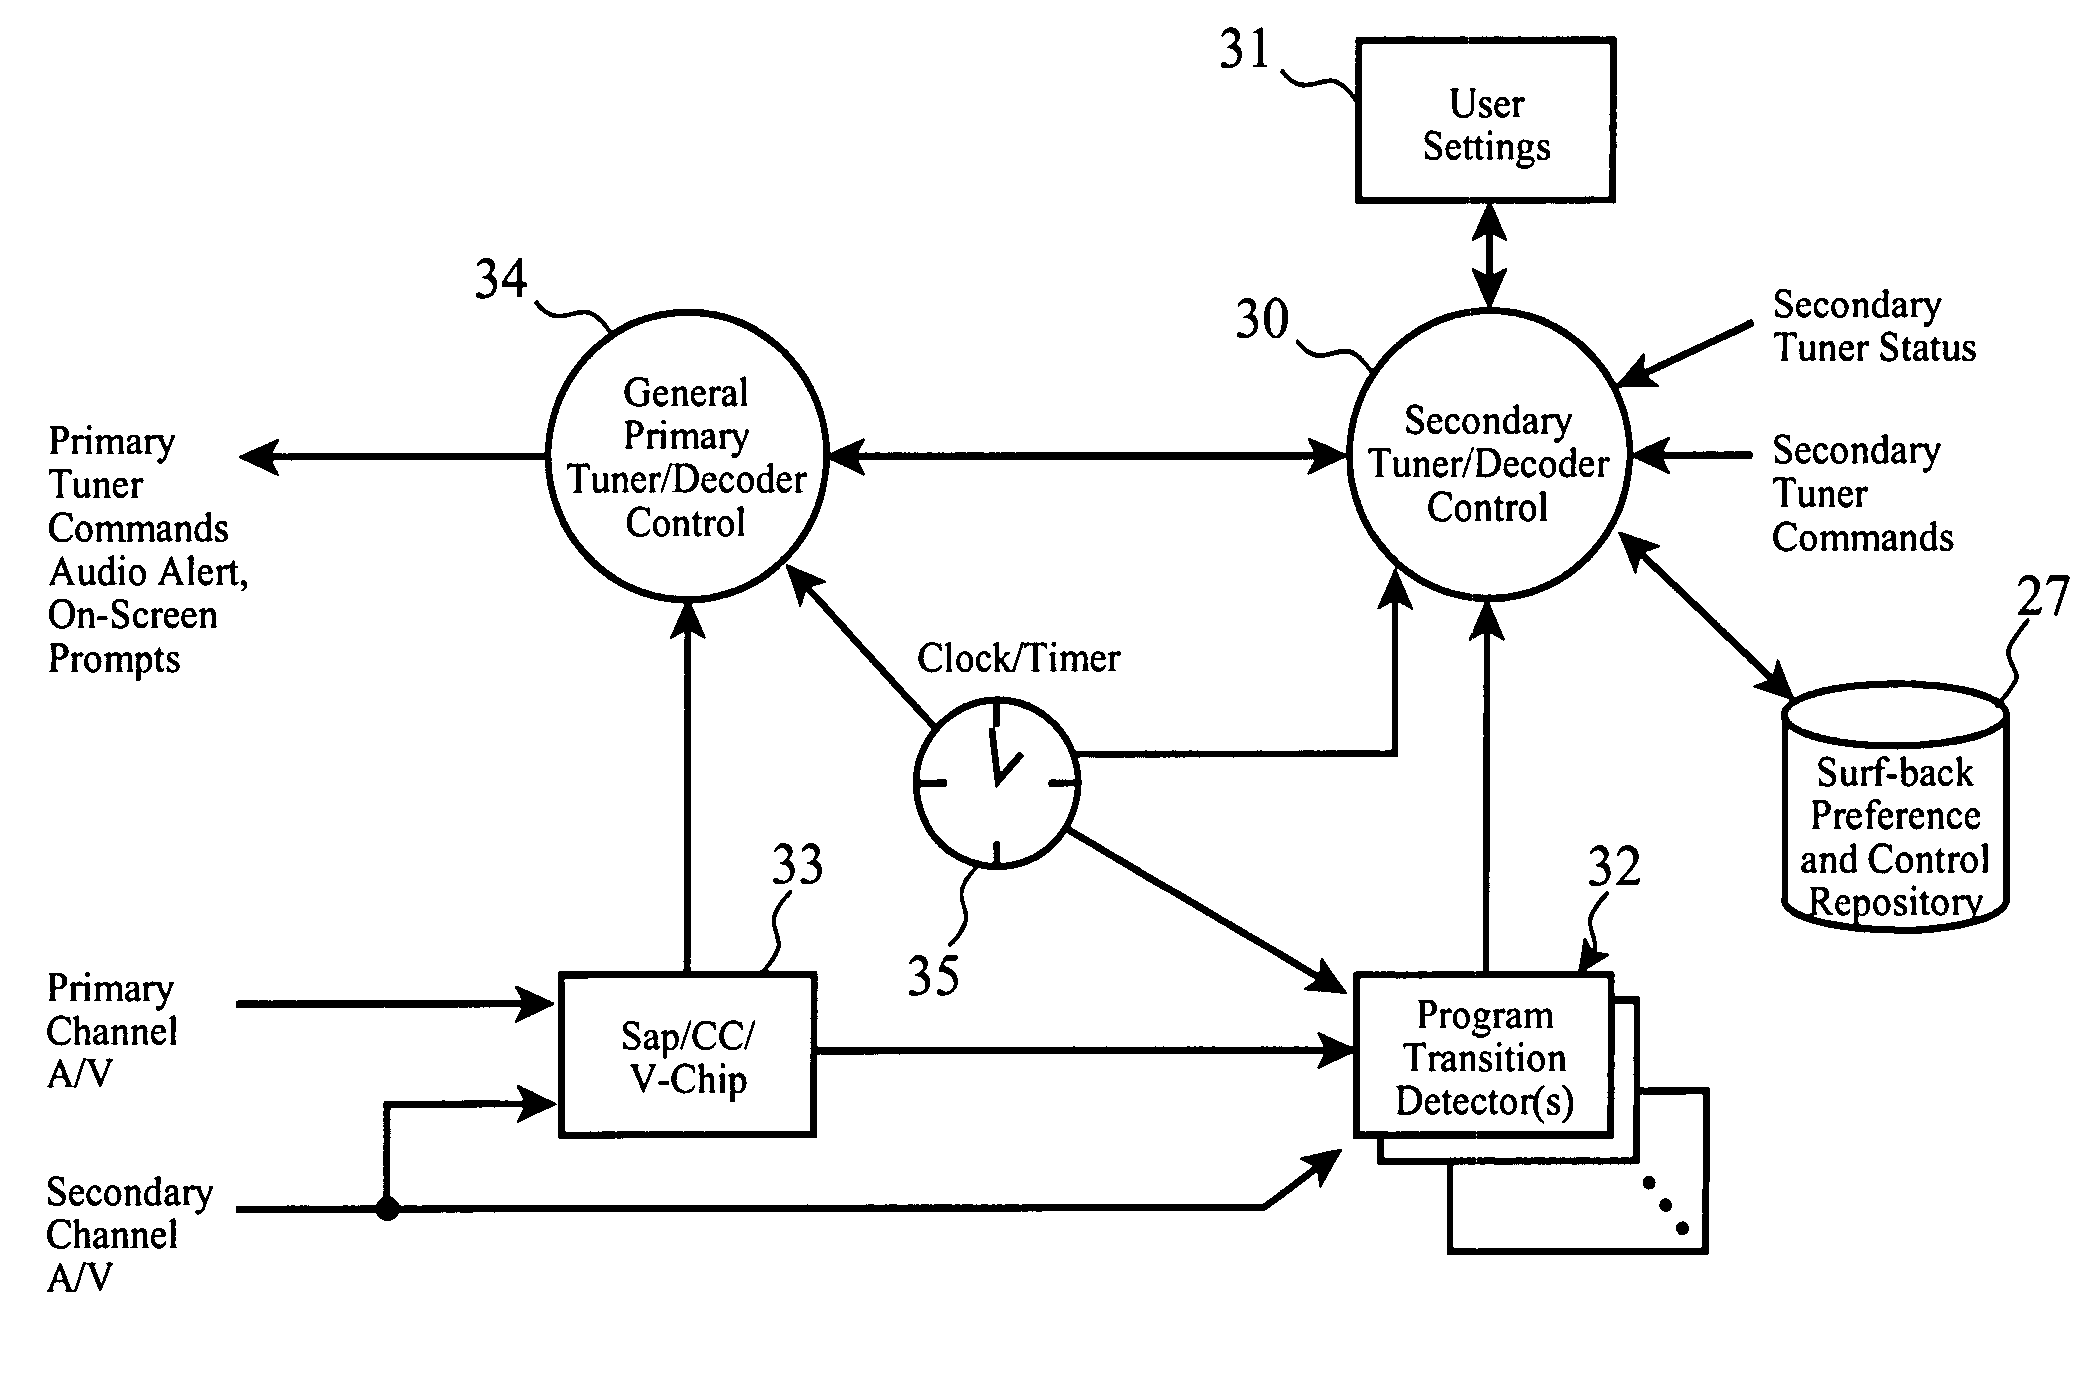 Sub-program avoidance redirection for broadcast receivers